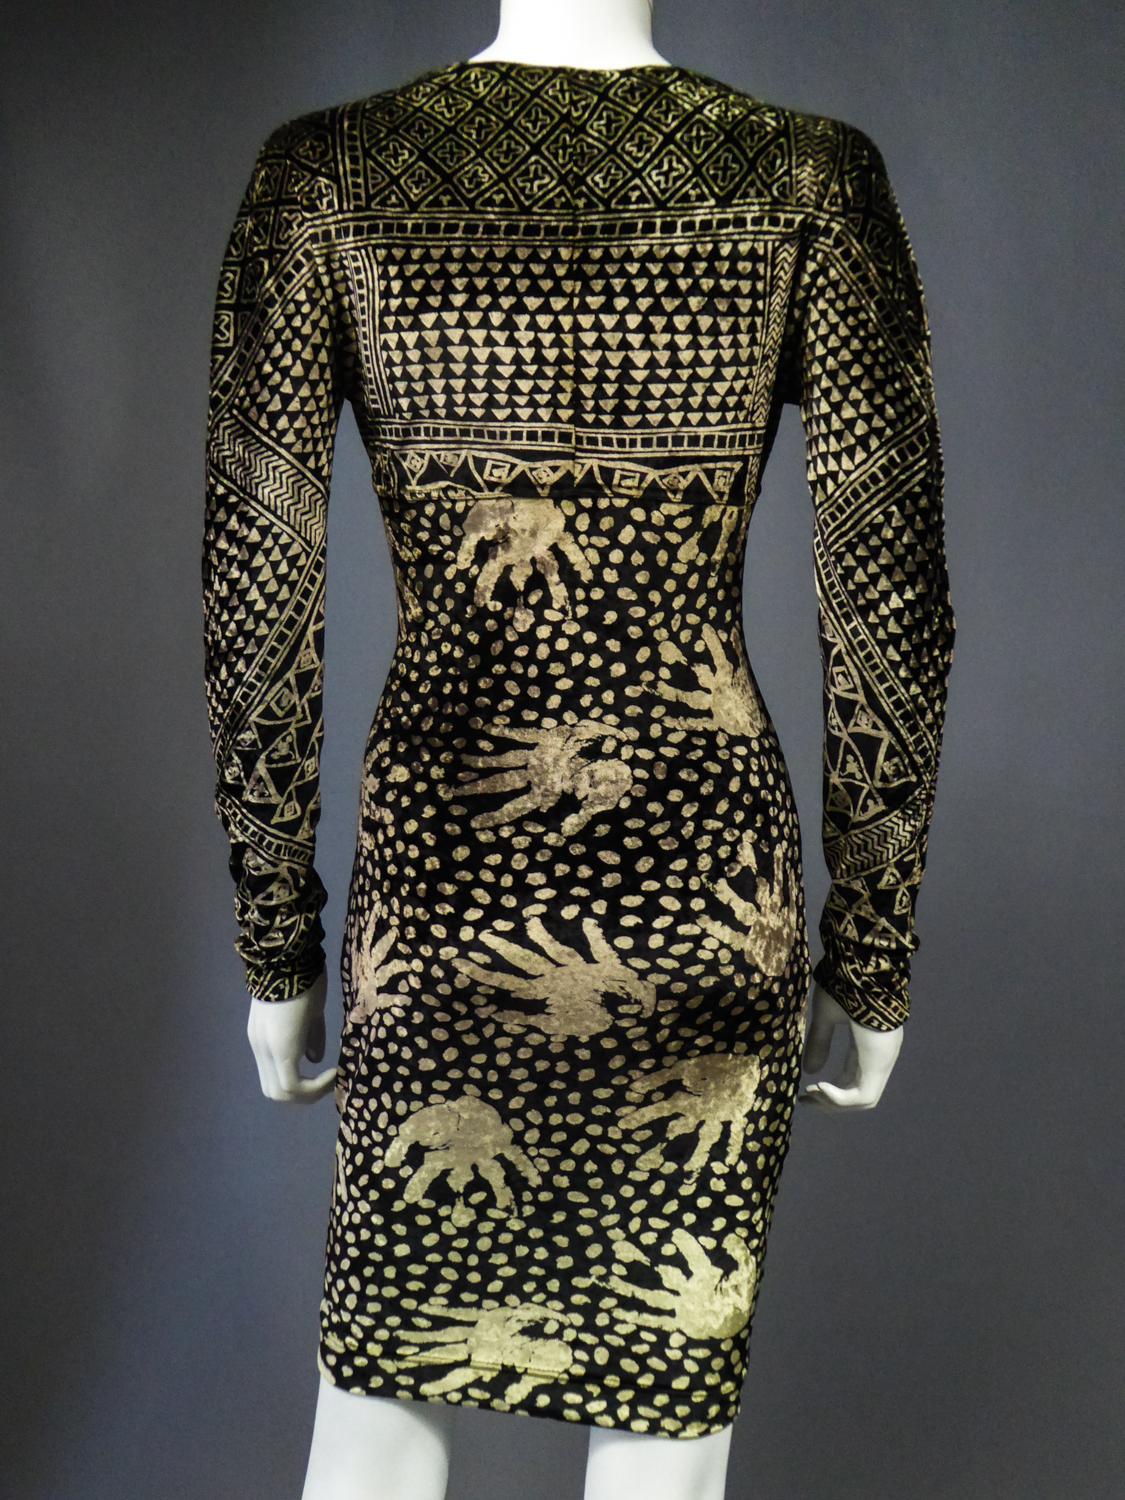 A Christian Lacroix Dress in Printed Velvet Circa 1991/2000 For Sale 7